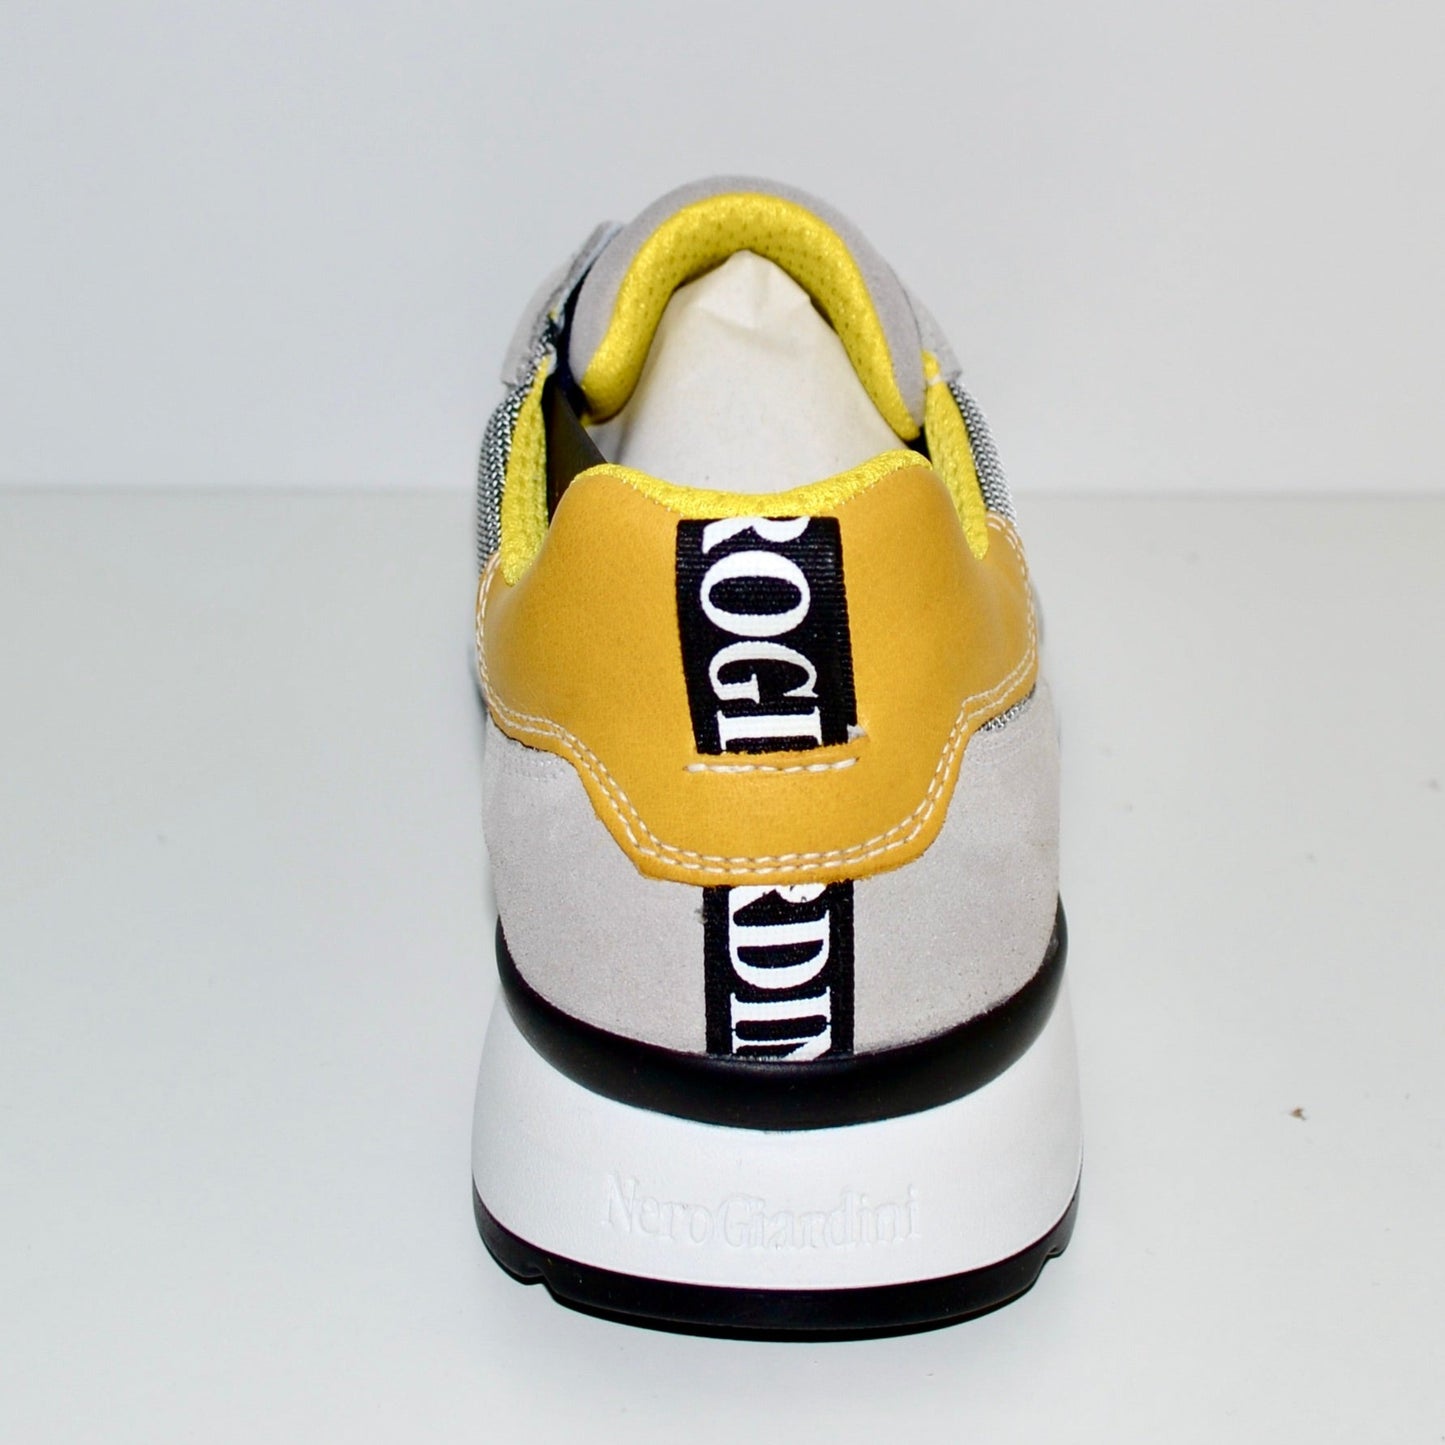 Sneakers NeroGiardini man leather and fabric gray and yellow